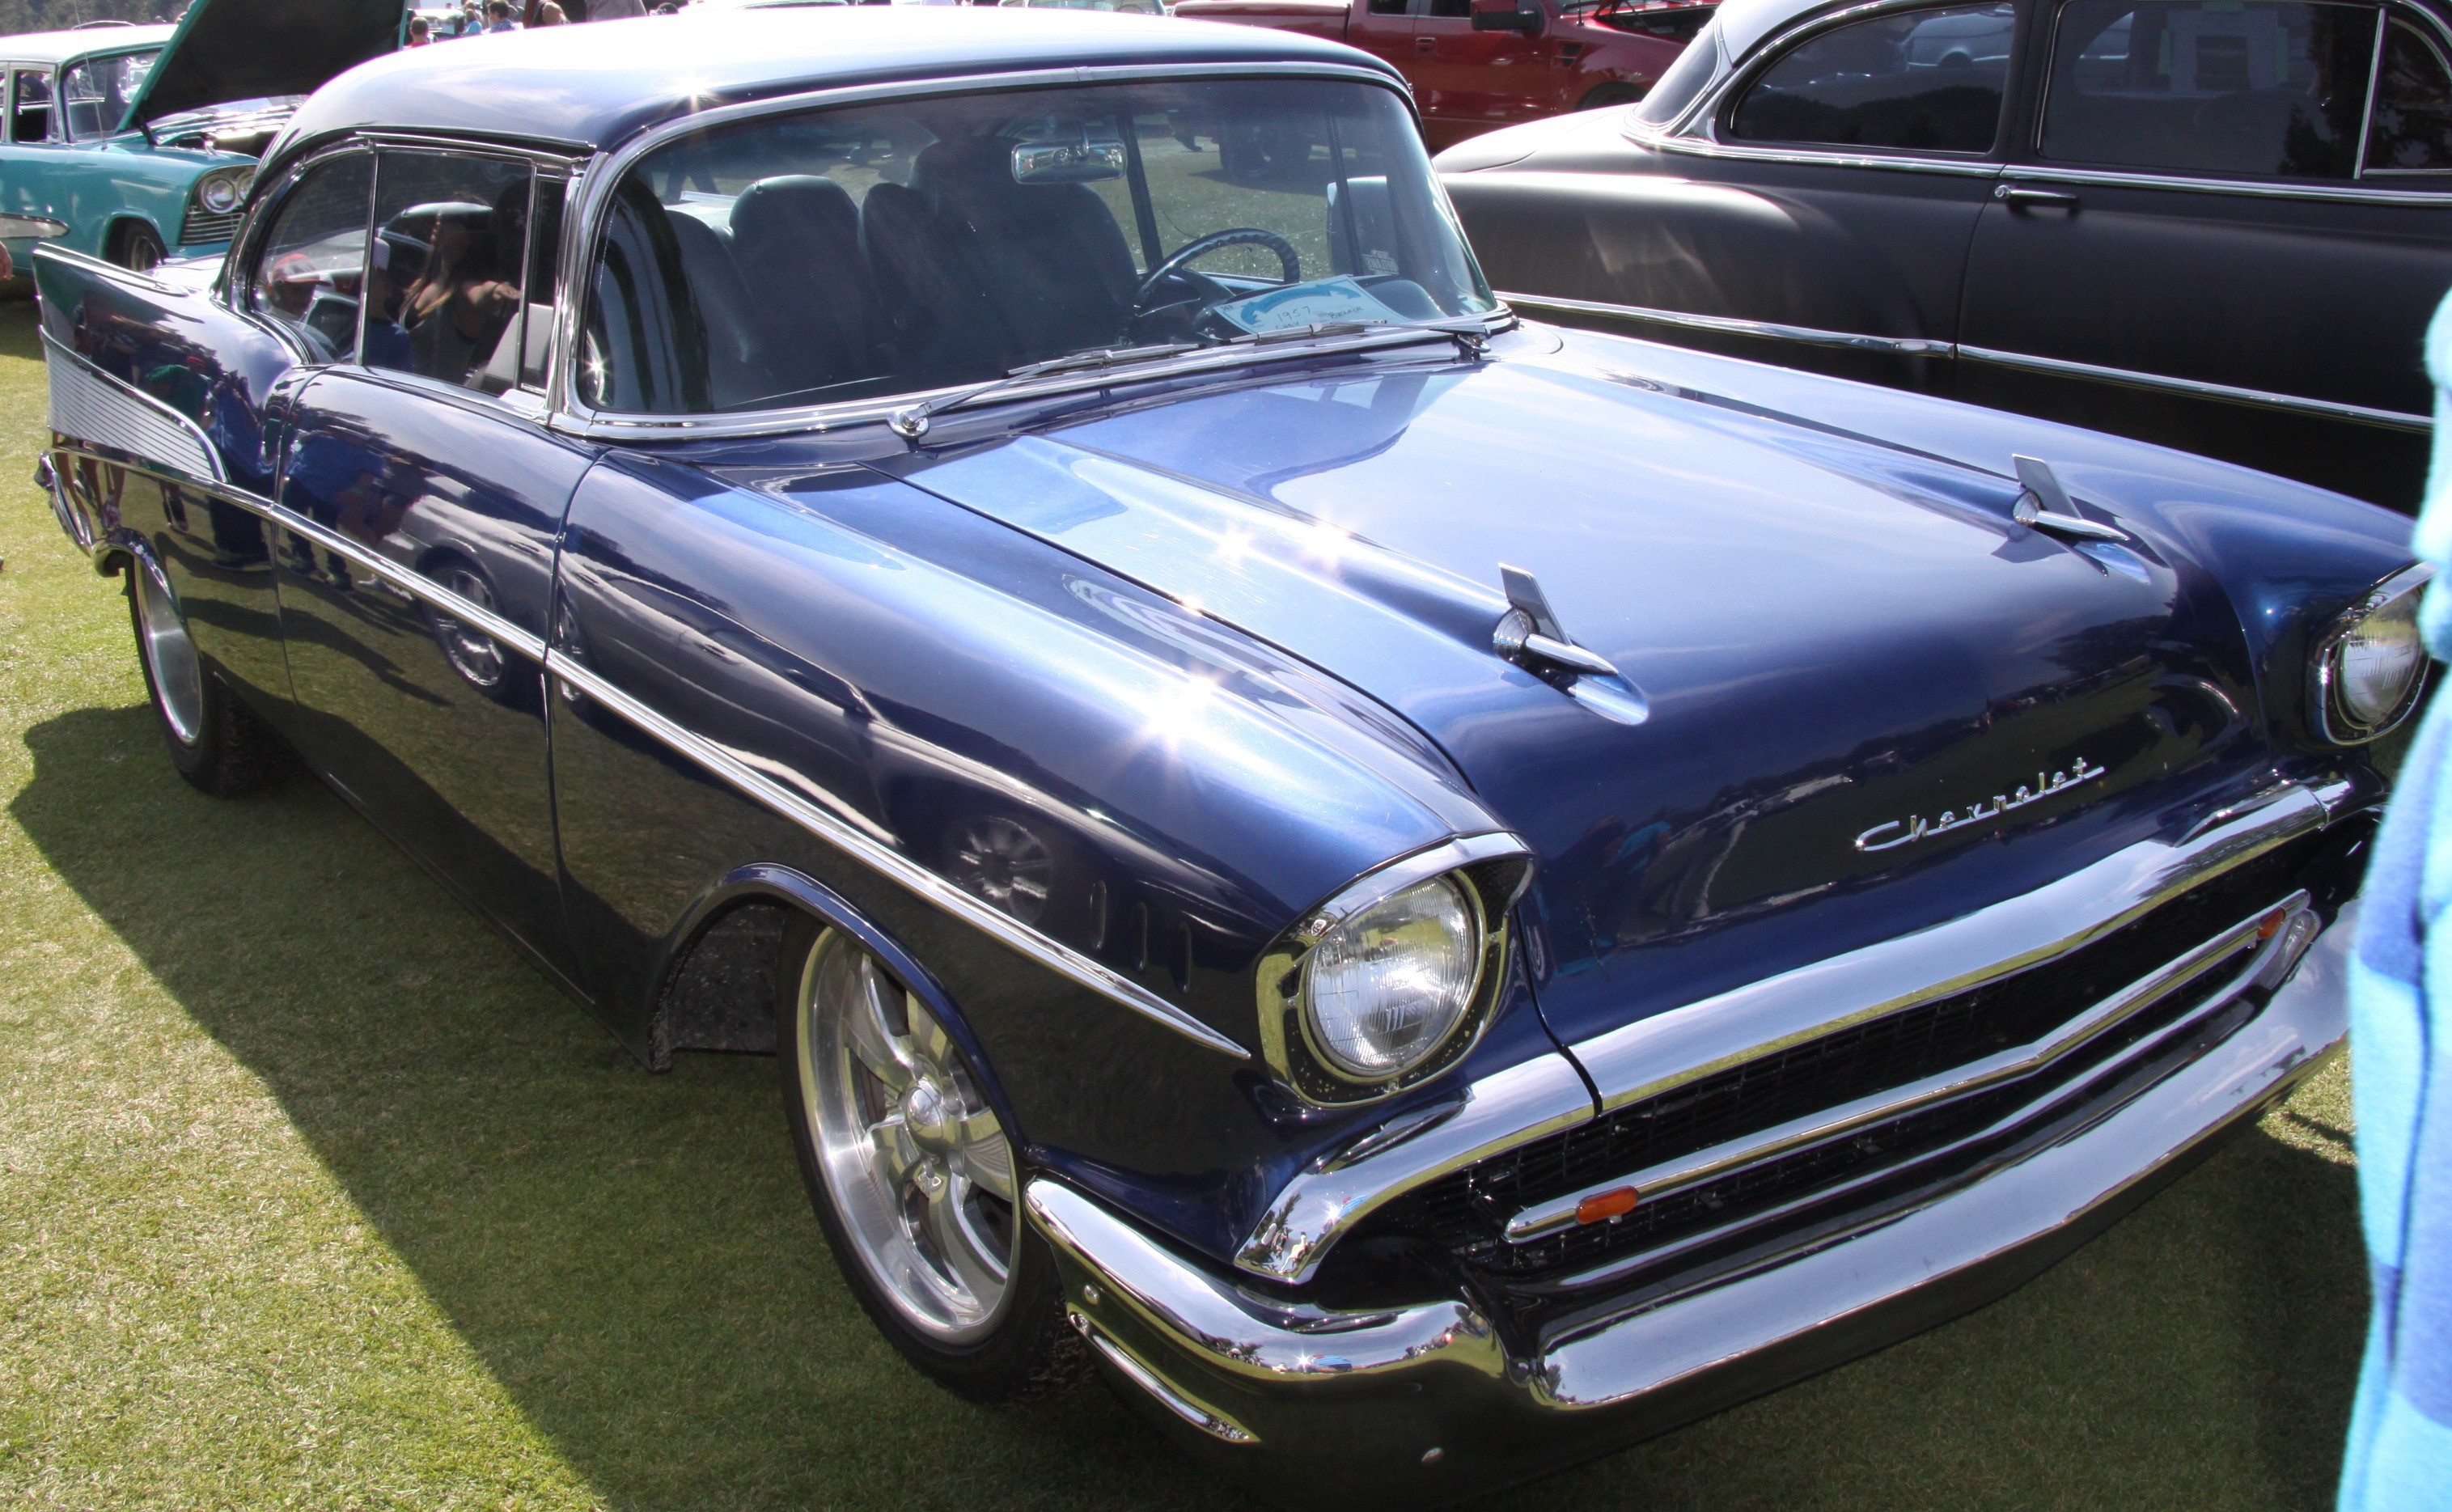 Speedy Vehicles, Hd Car Wallpaper, Expensive Toys, - 1957 Chevrolet , HD Wallpaper & Backgrounds